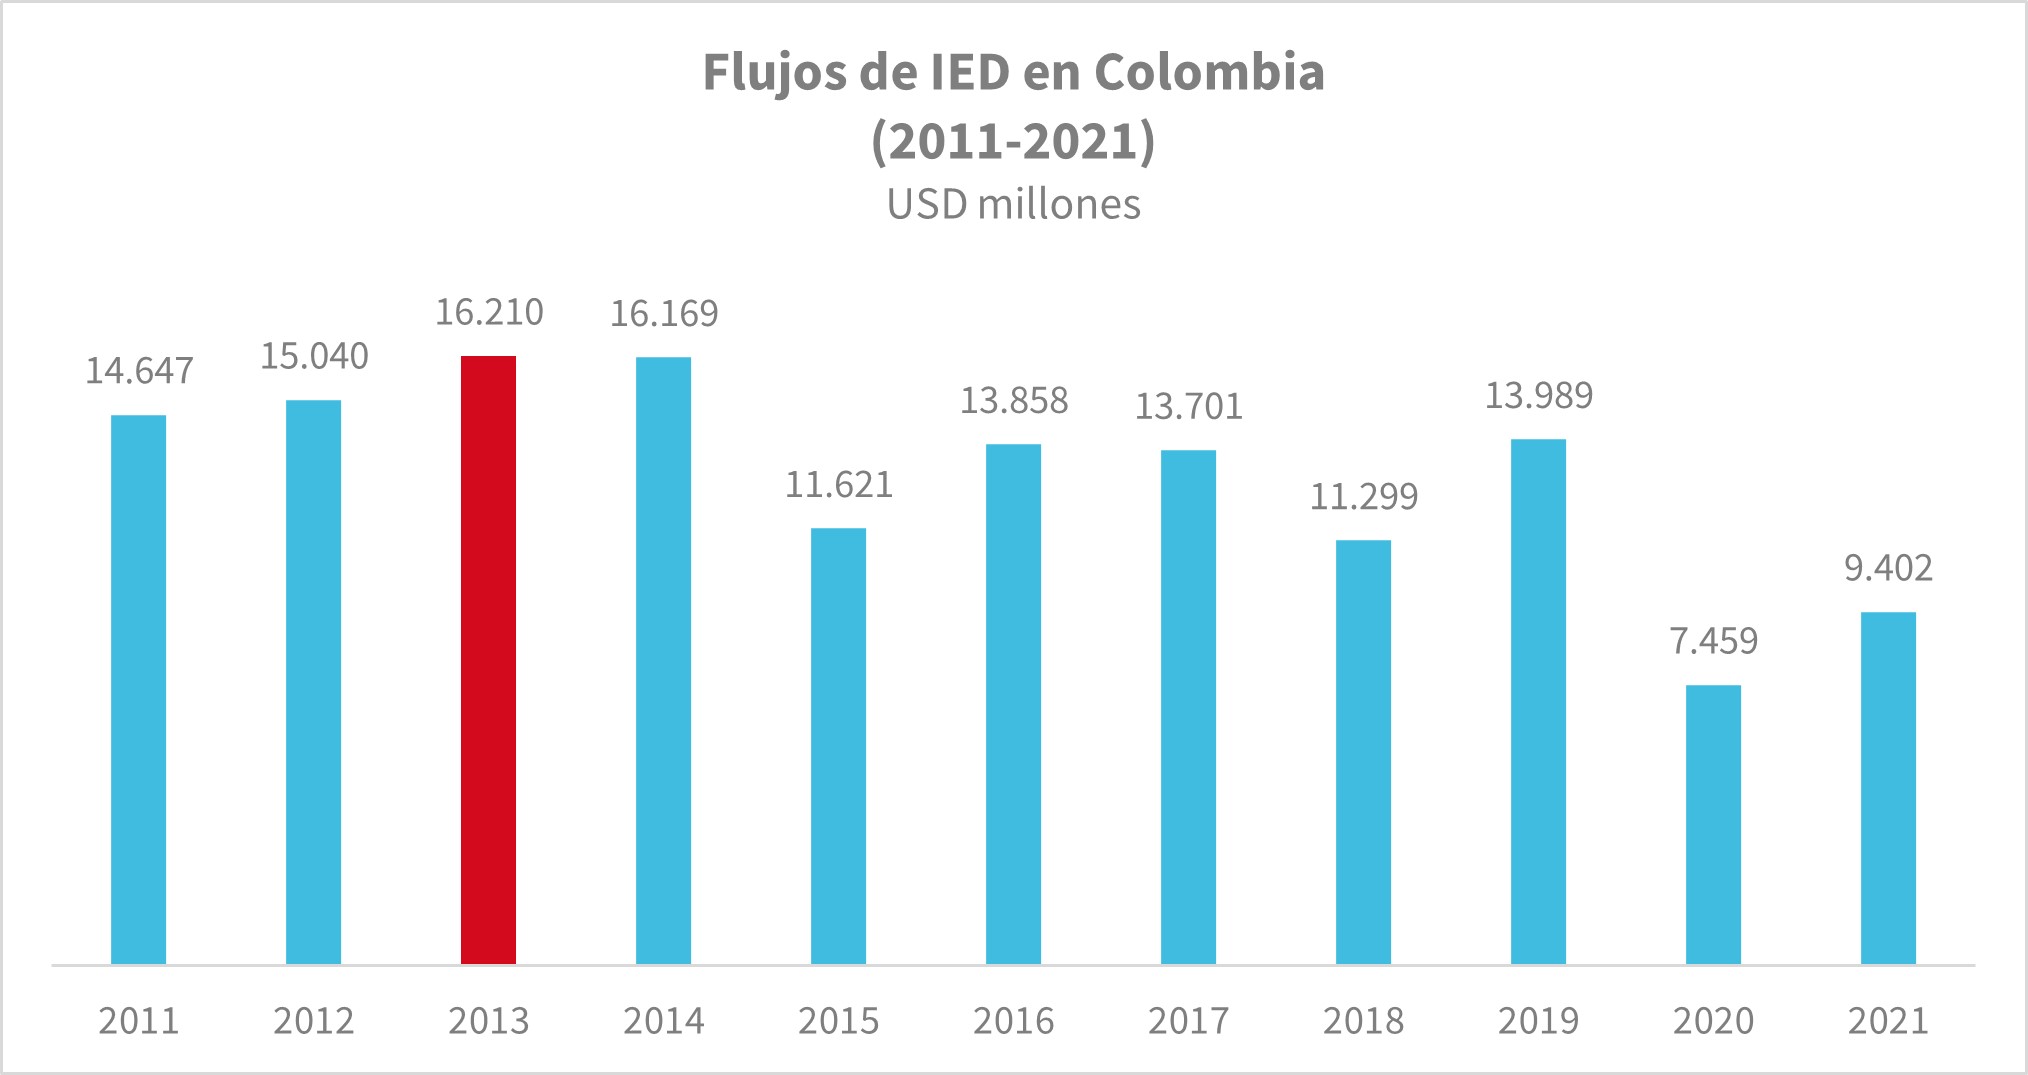 Flujos IED Colombia (2011-2021)